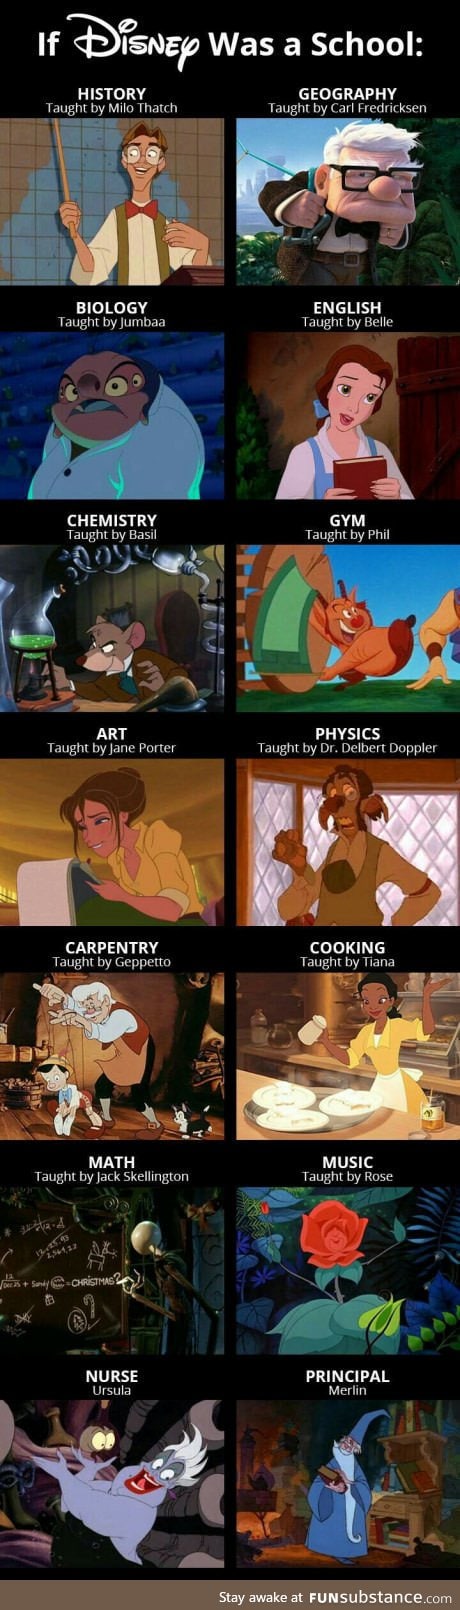 If Disney was a school... I totally would to go there!